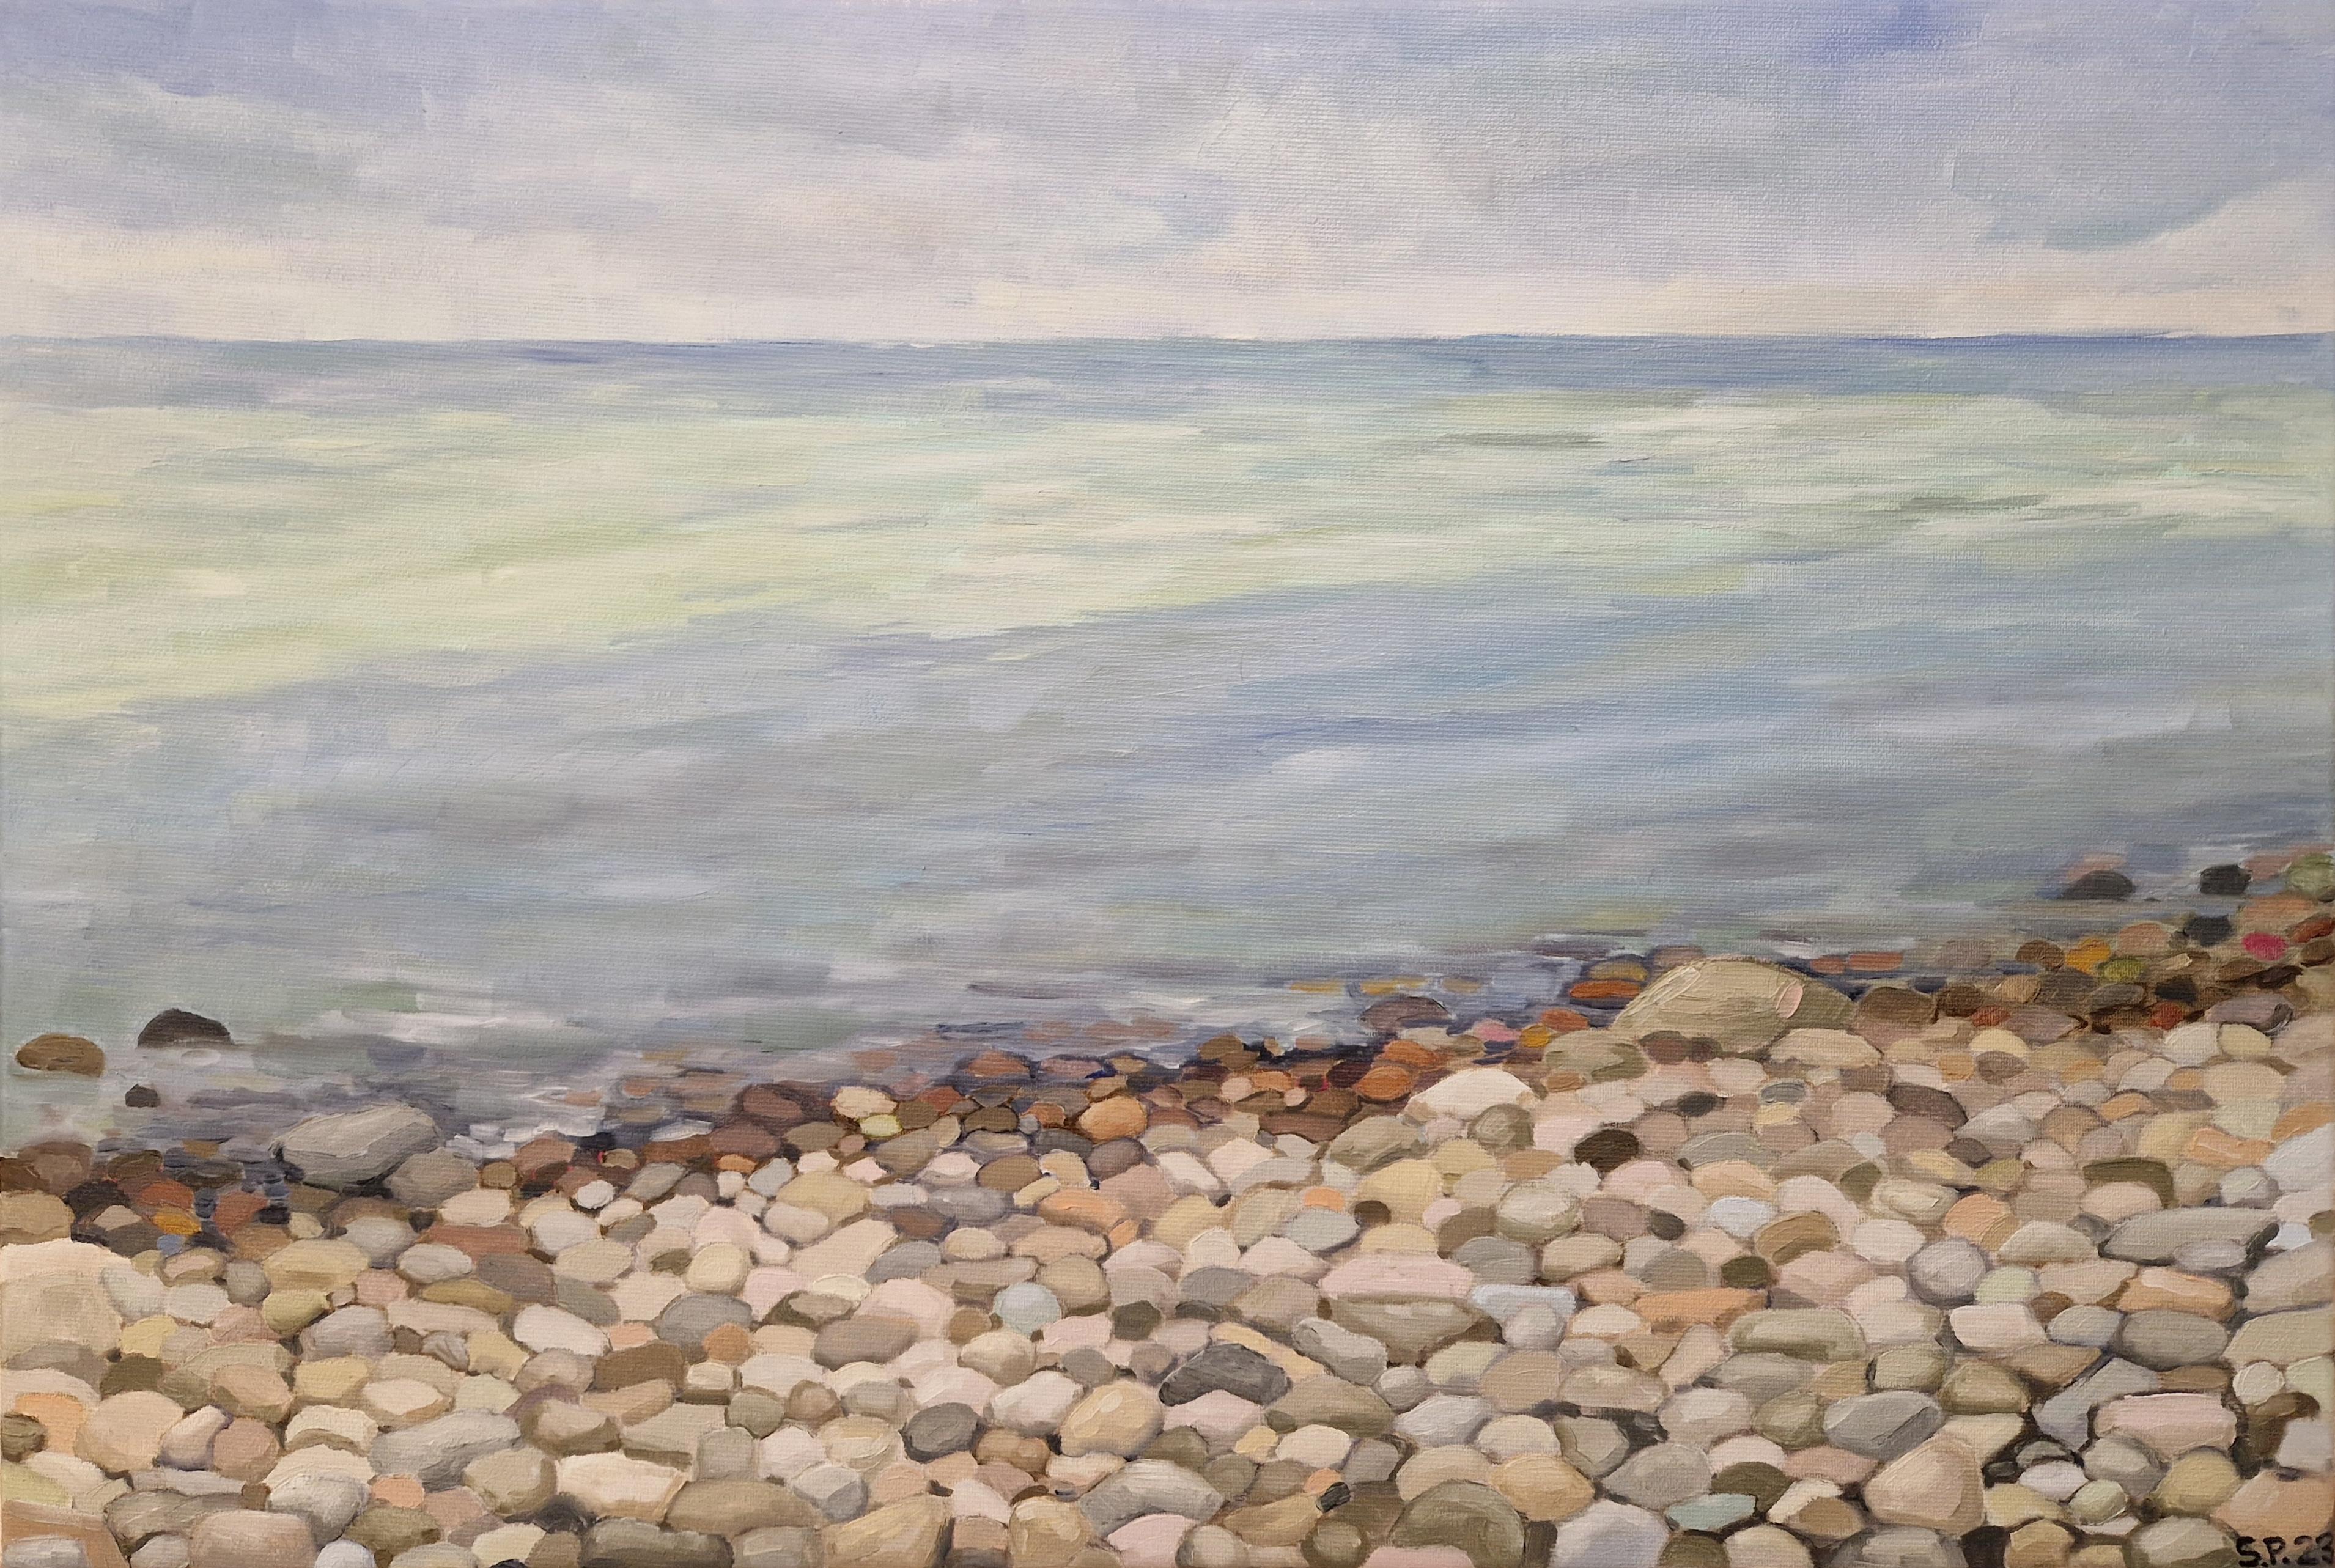 The painting 'Steinstrand'.